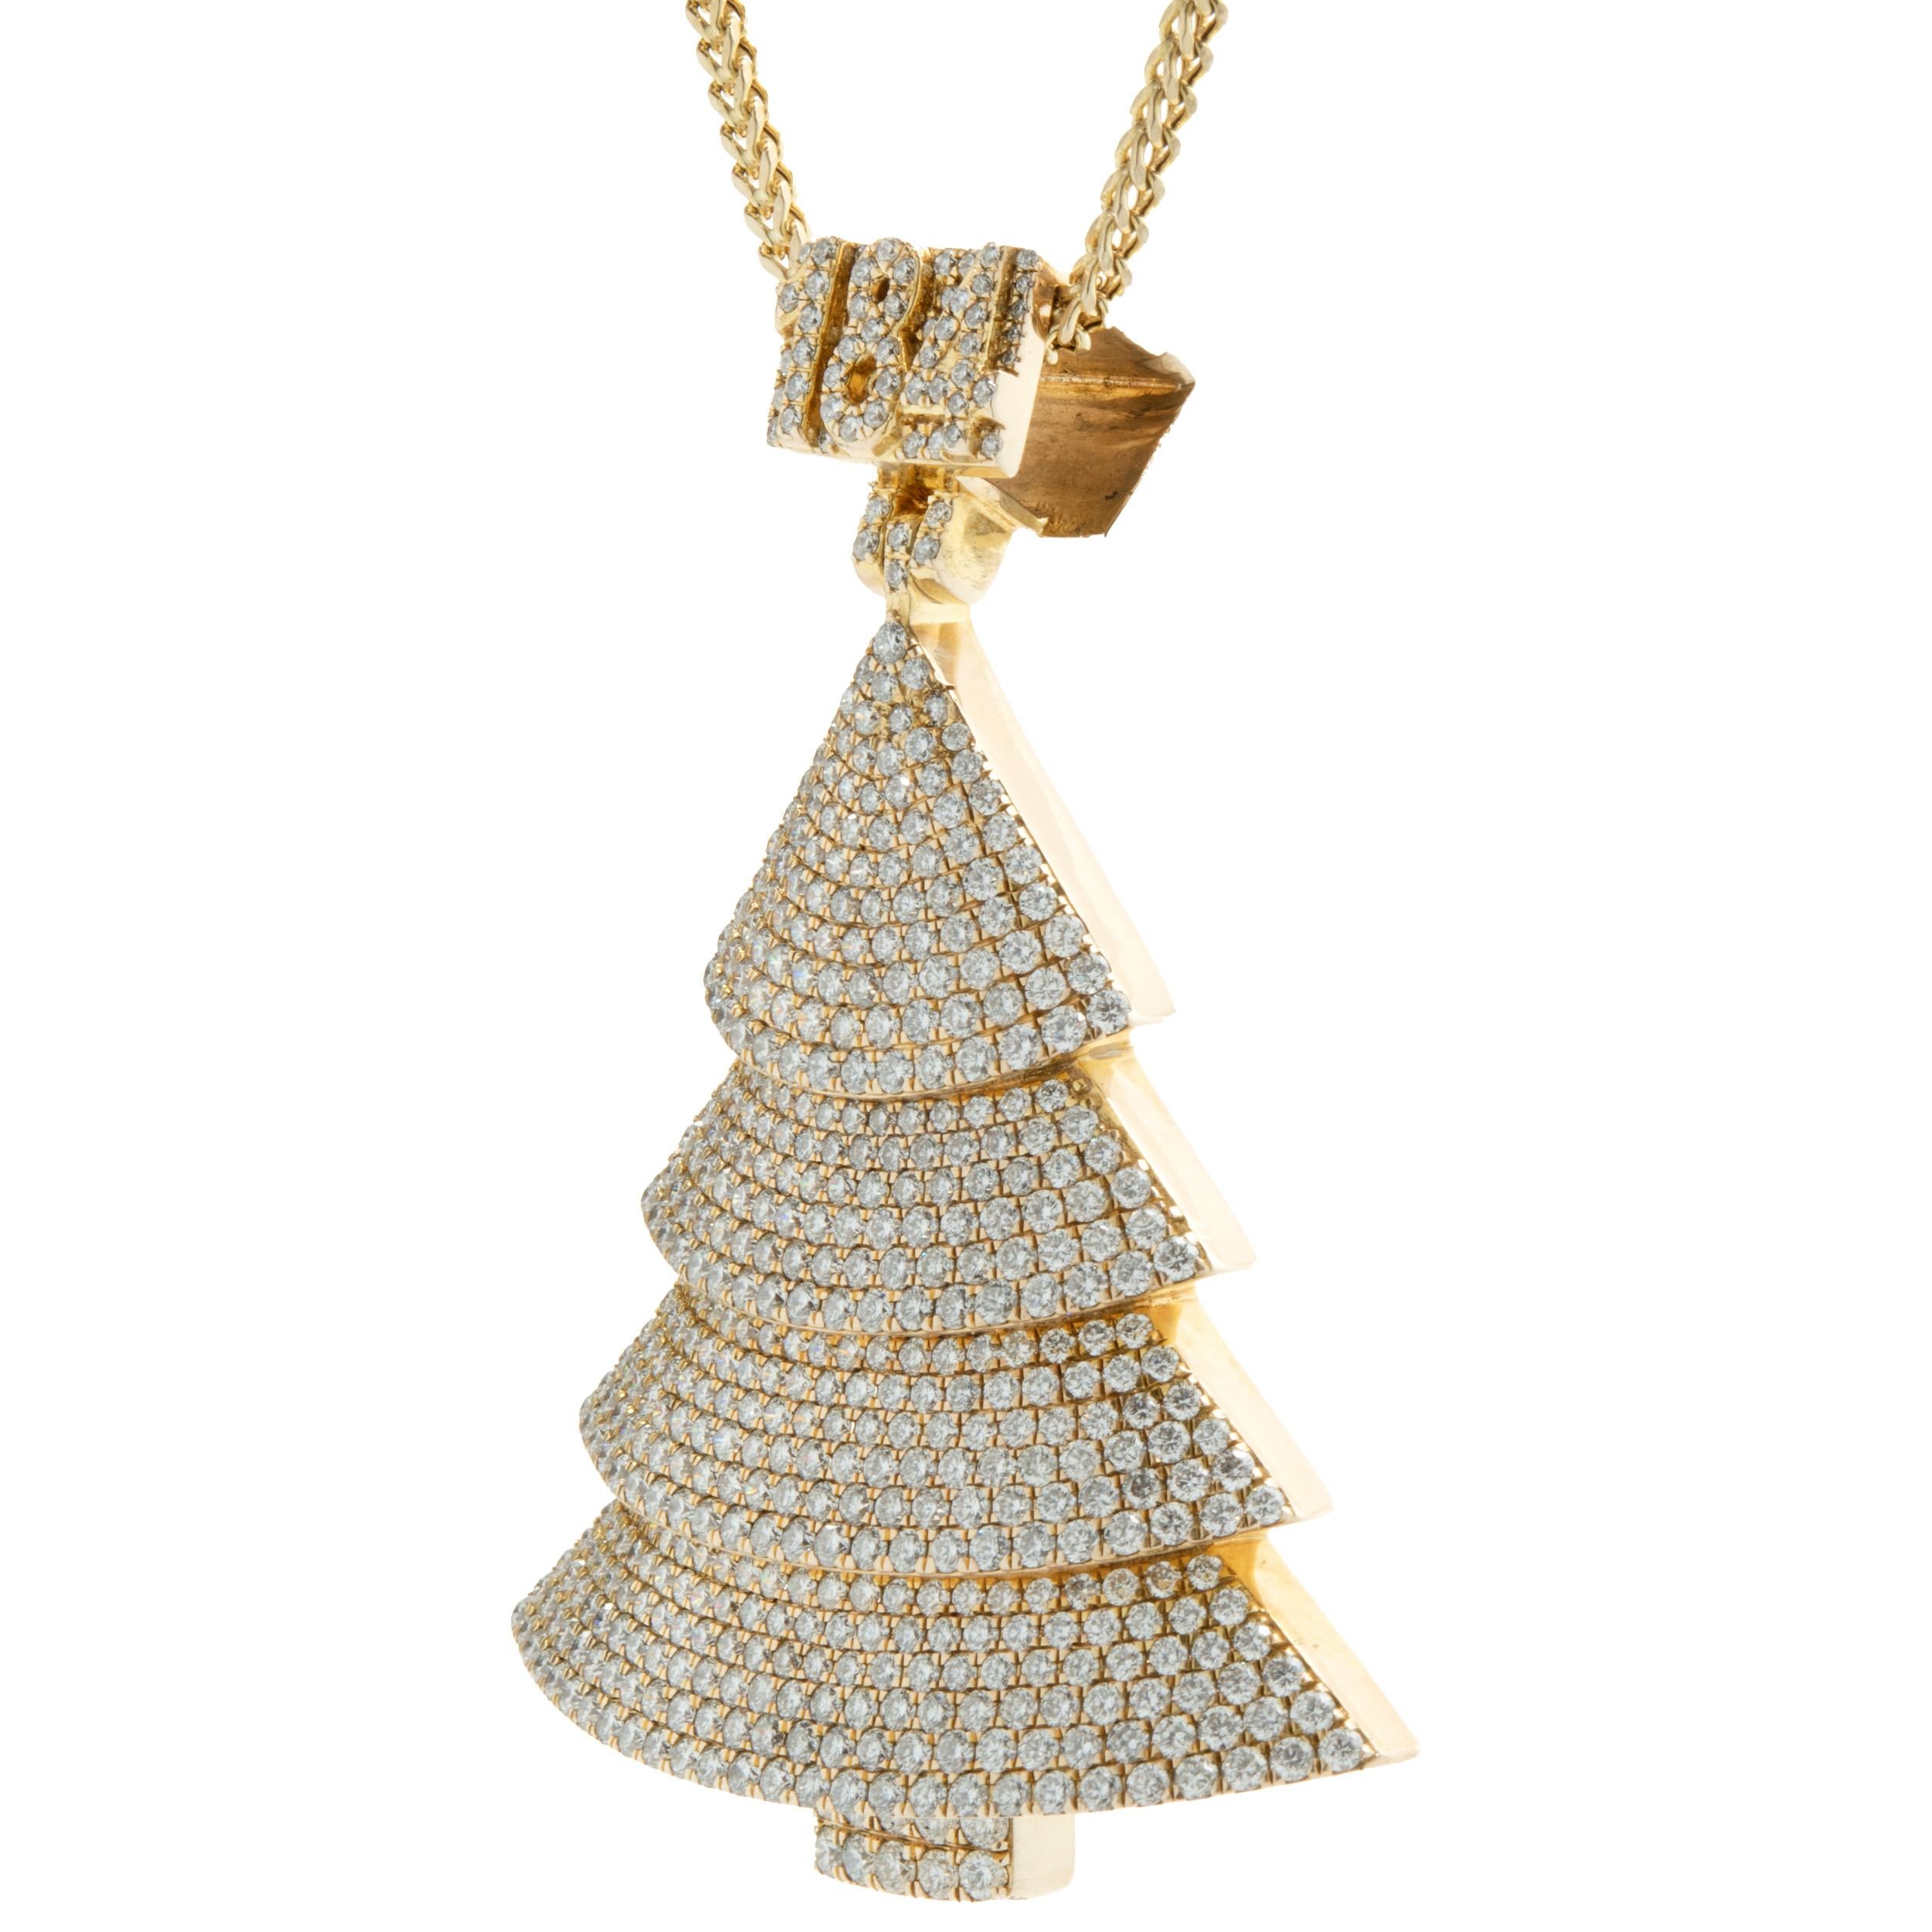 10 Karat Yellow Gold Pave Diamond “184” Pine Tree Necklace In Excellent Condition For Sale In Scottsdale, AZ